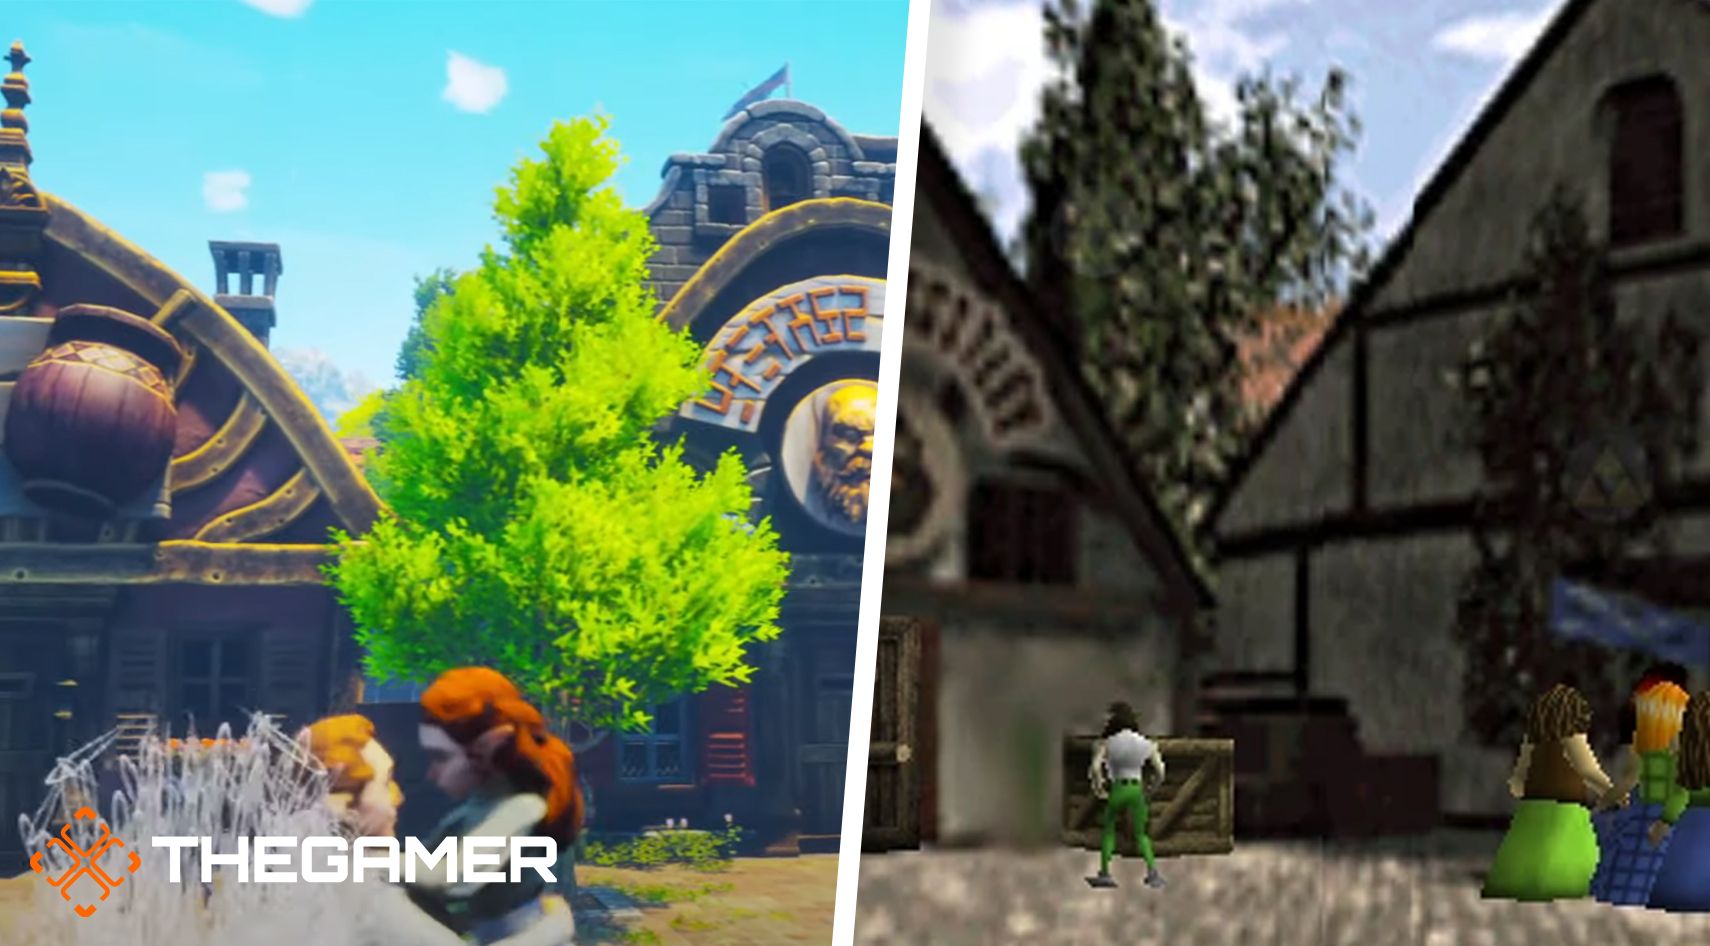 Legend of Zelda: Ocarina of Time has been remade in Unreal Engine 4 and  looks amazing